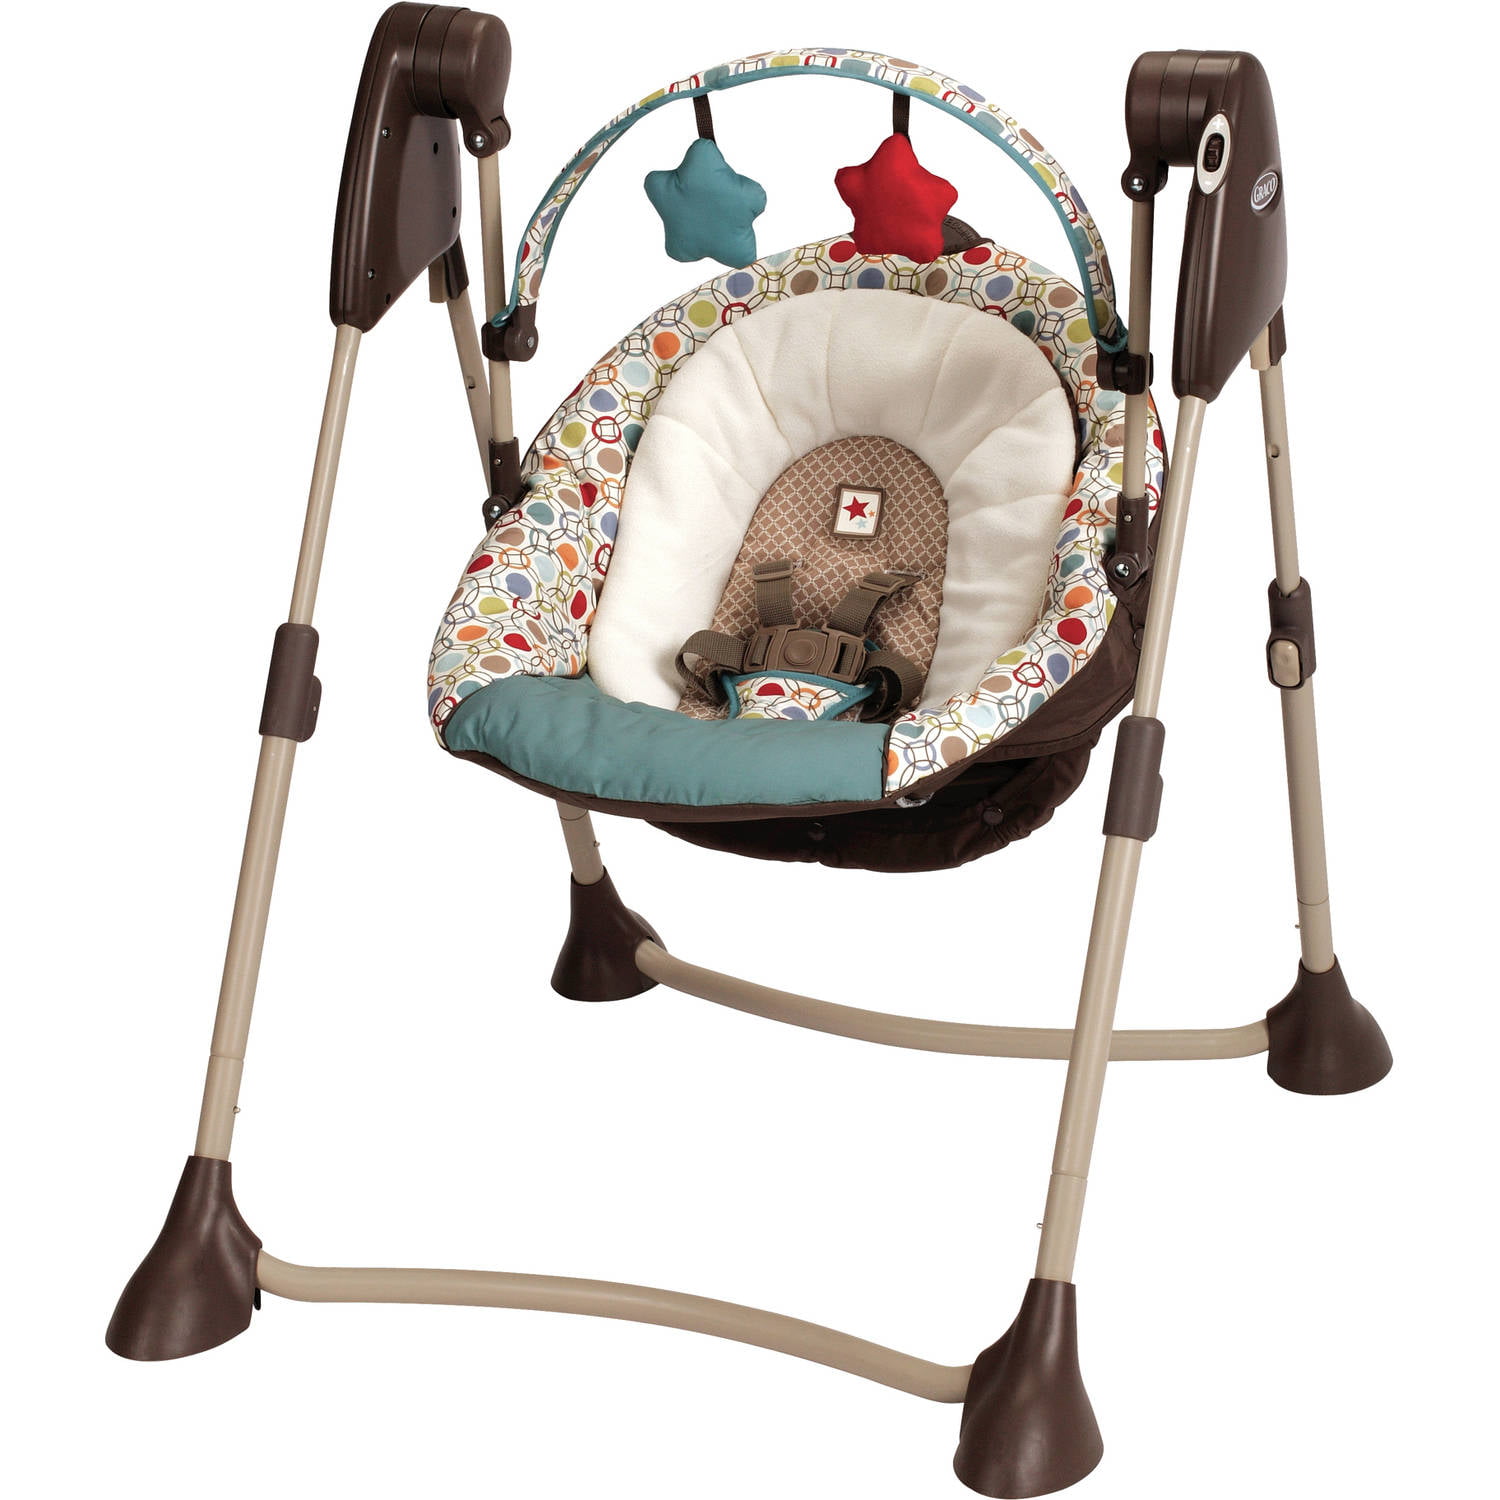 Graco Swing By Me Portable Baby Swing 